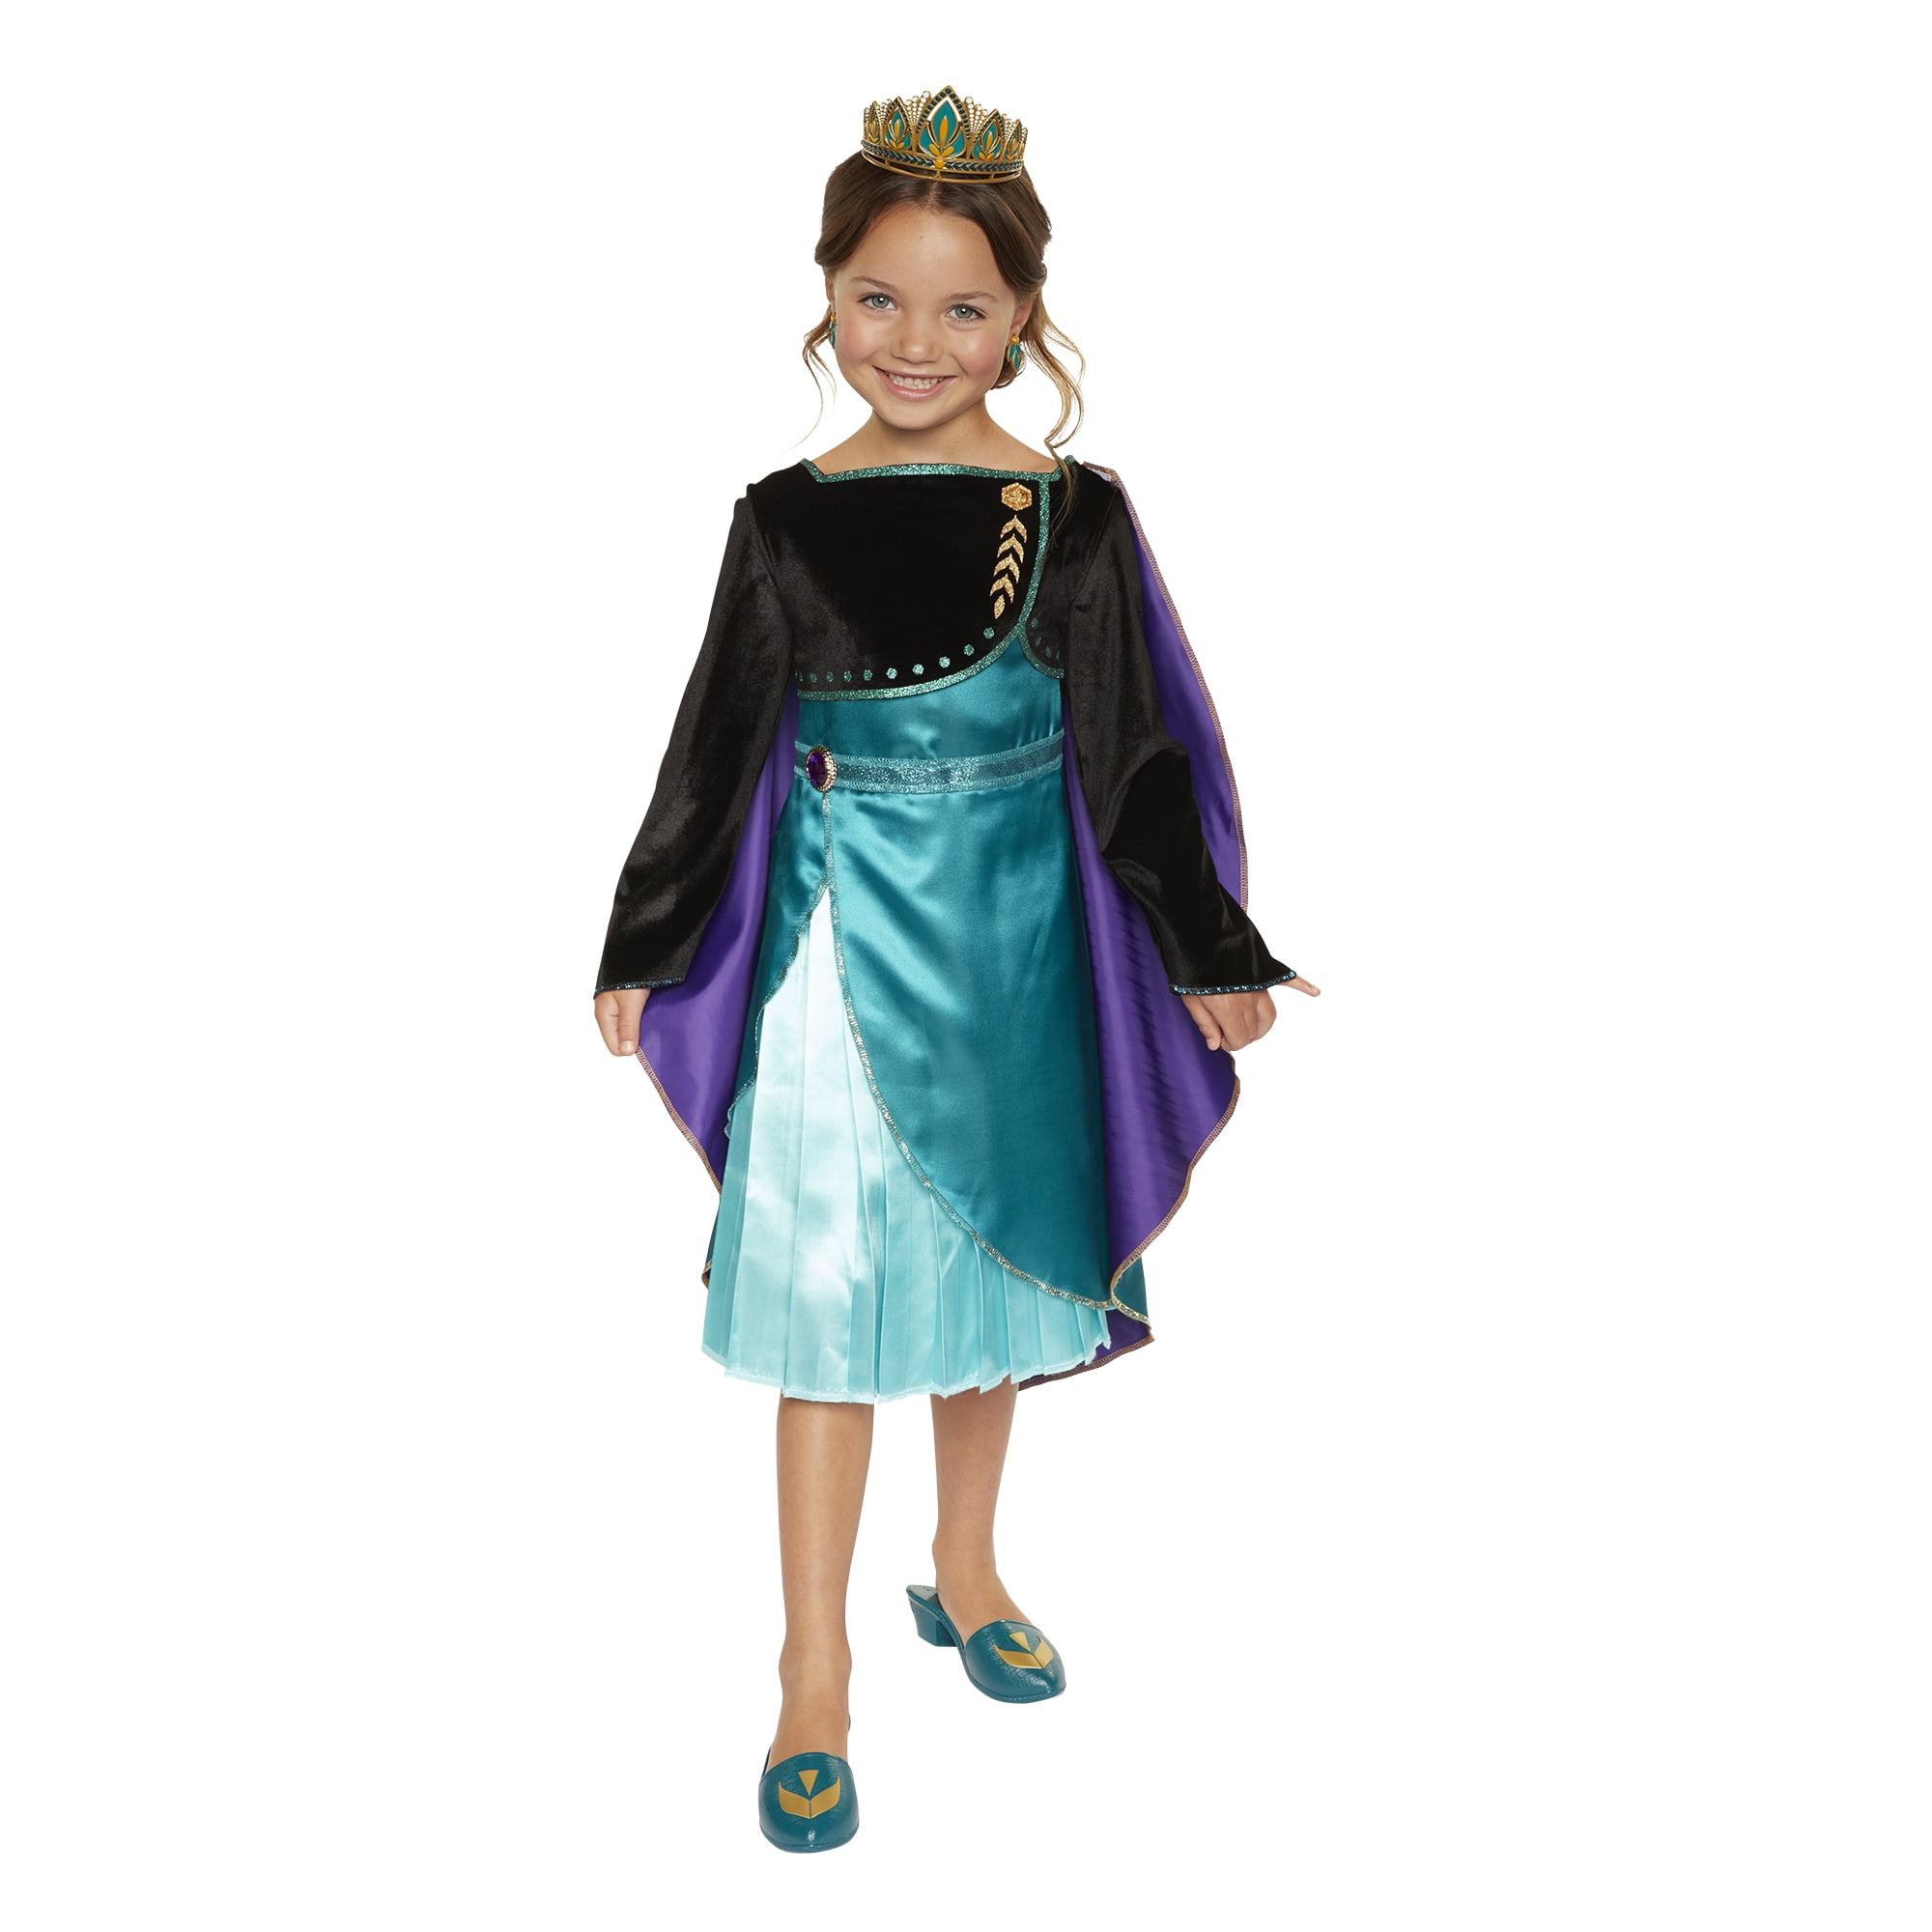 OFFICIAL DISNEY FROZEN 2 Anna Costume Age 5-6 'Into the Unknown' **NEW** Anna 